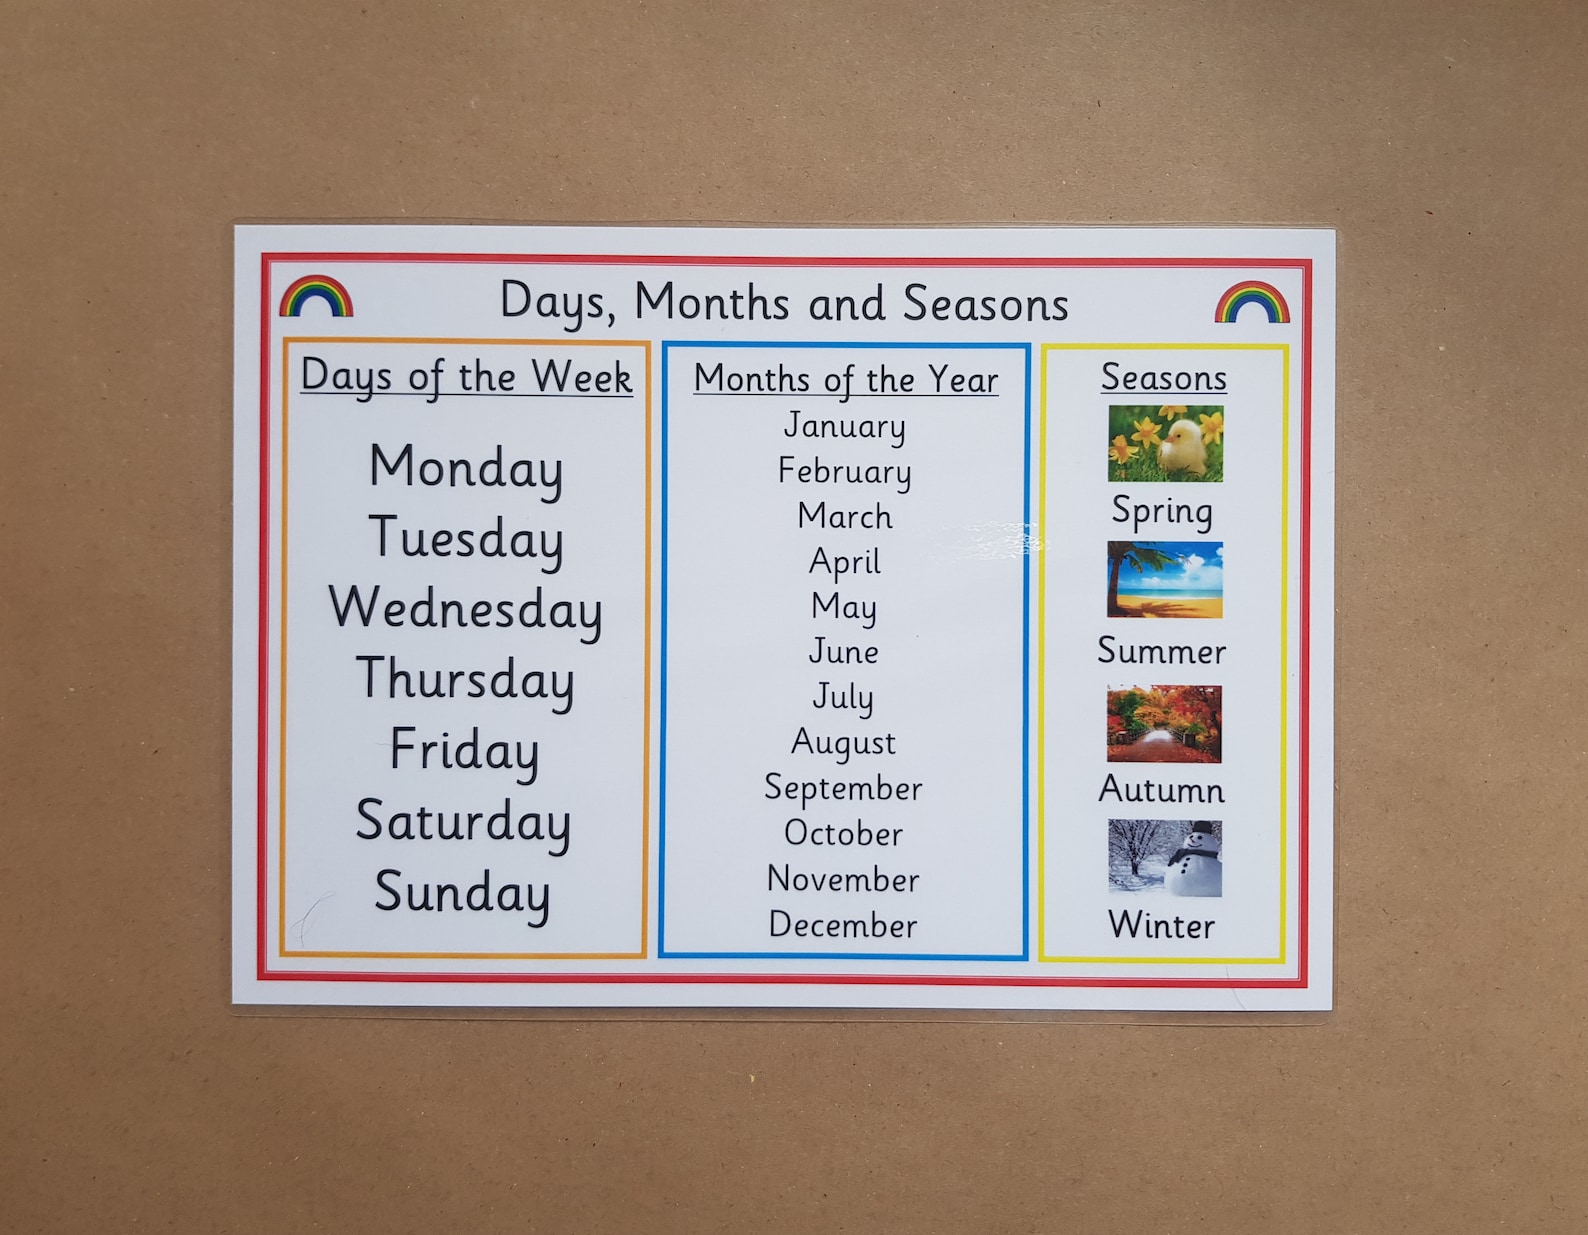 Days of the week months. Seasons months Days of the week. Days months Seasons. Seasons and months.